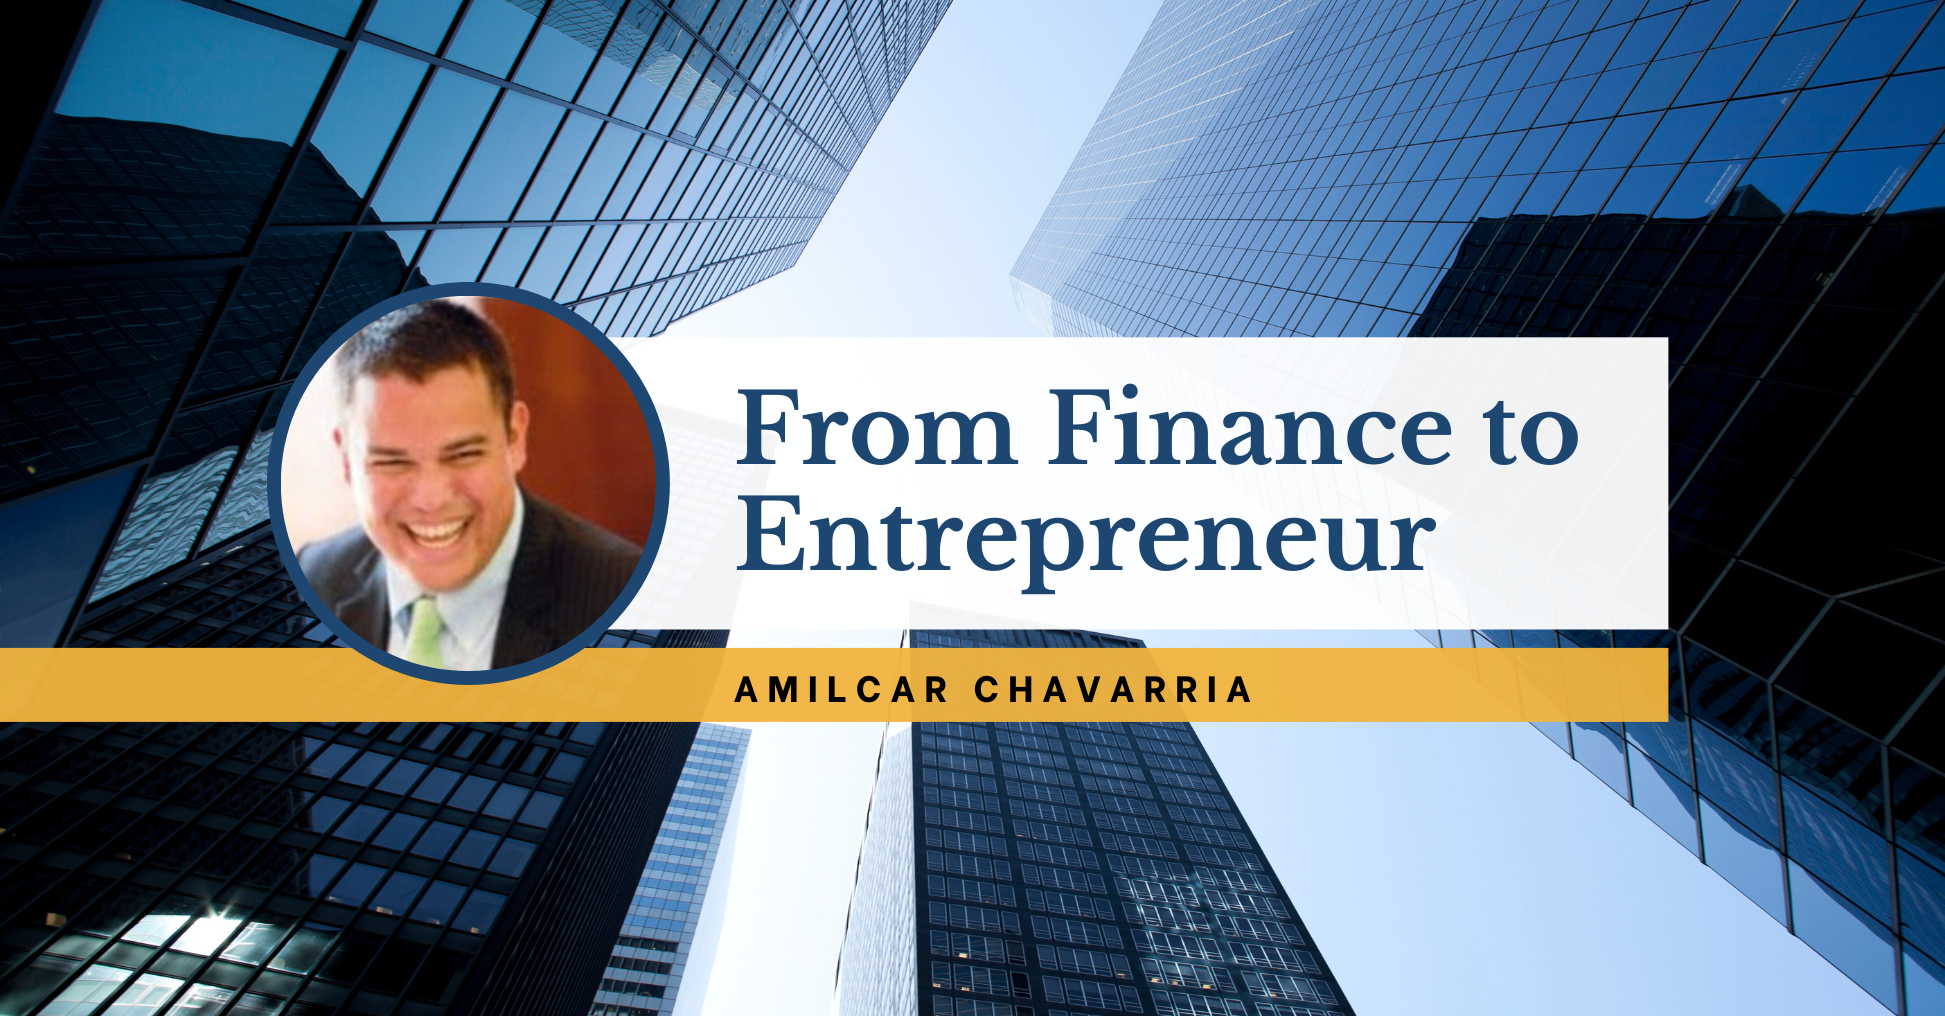 From Finance to Entrepreneur: Amilcar Chavarria